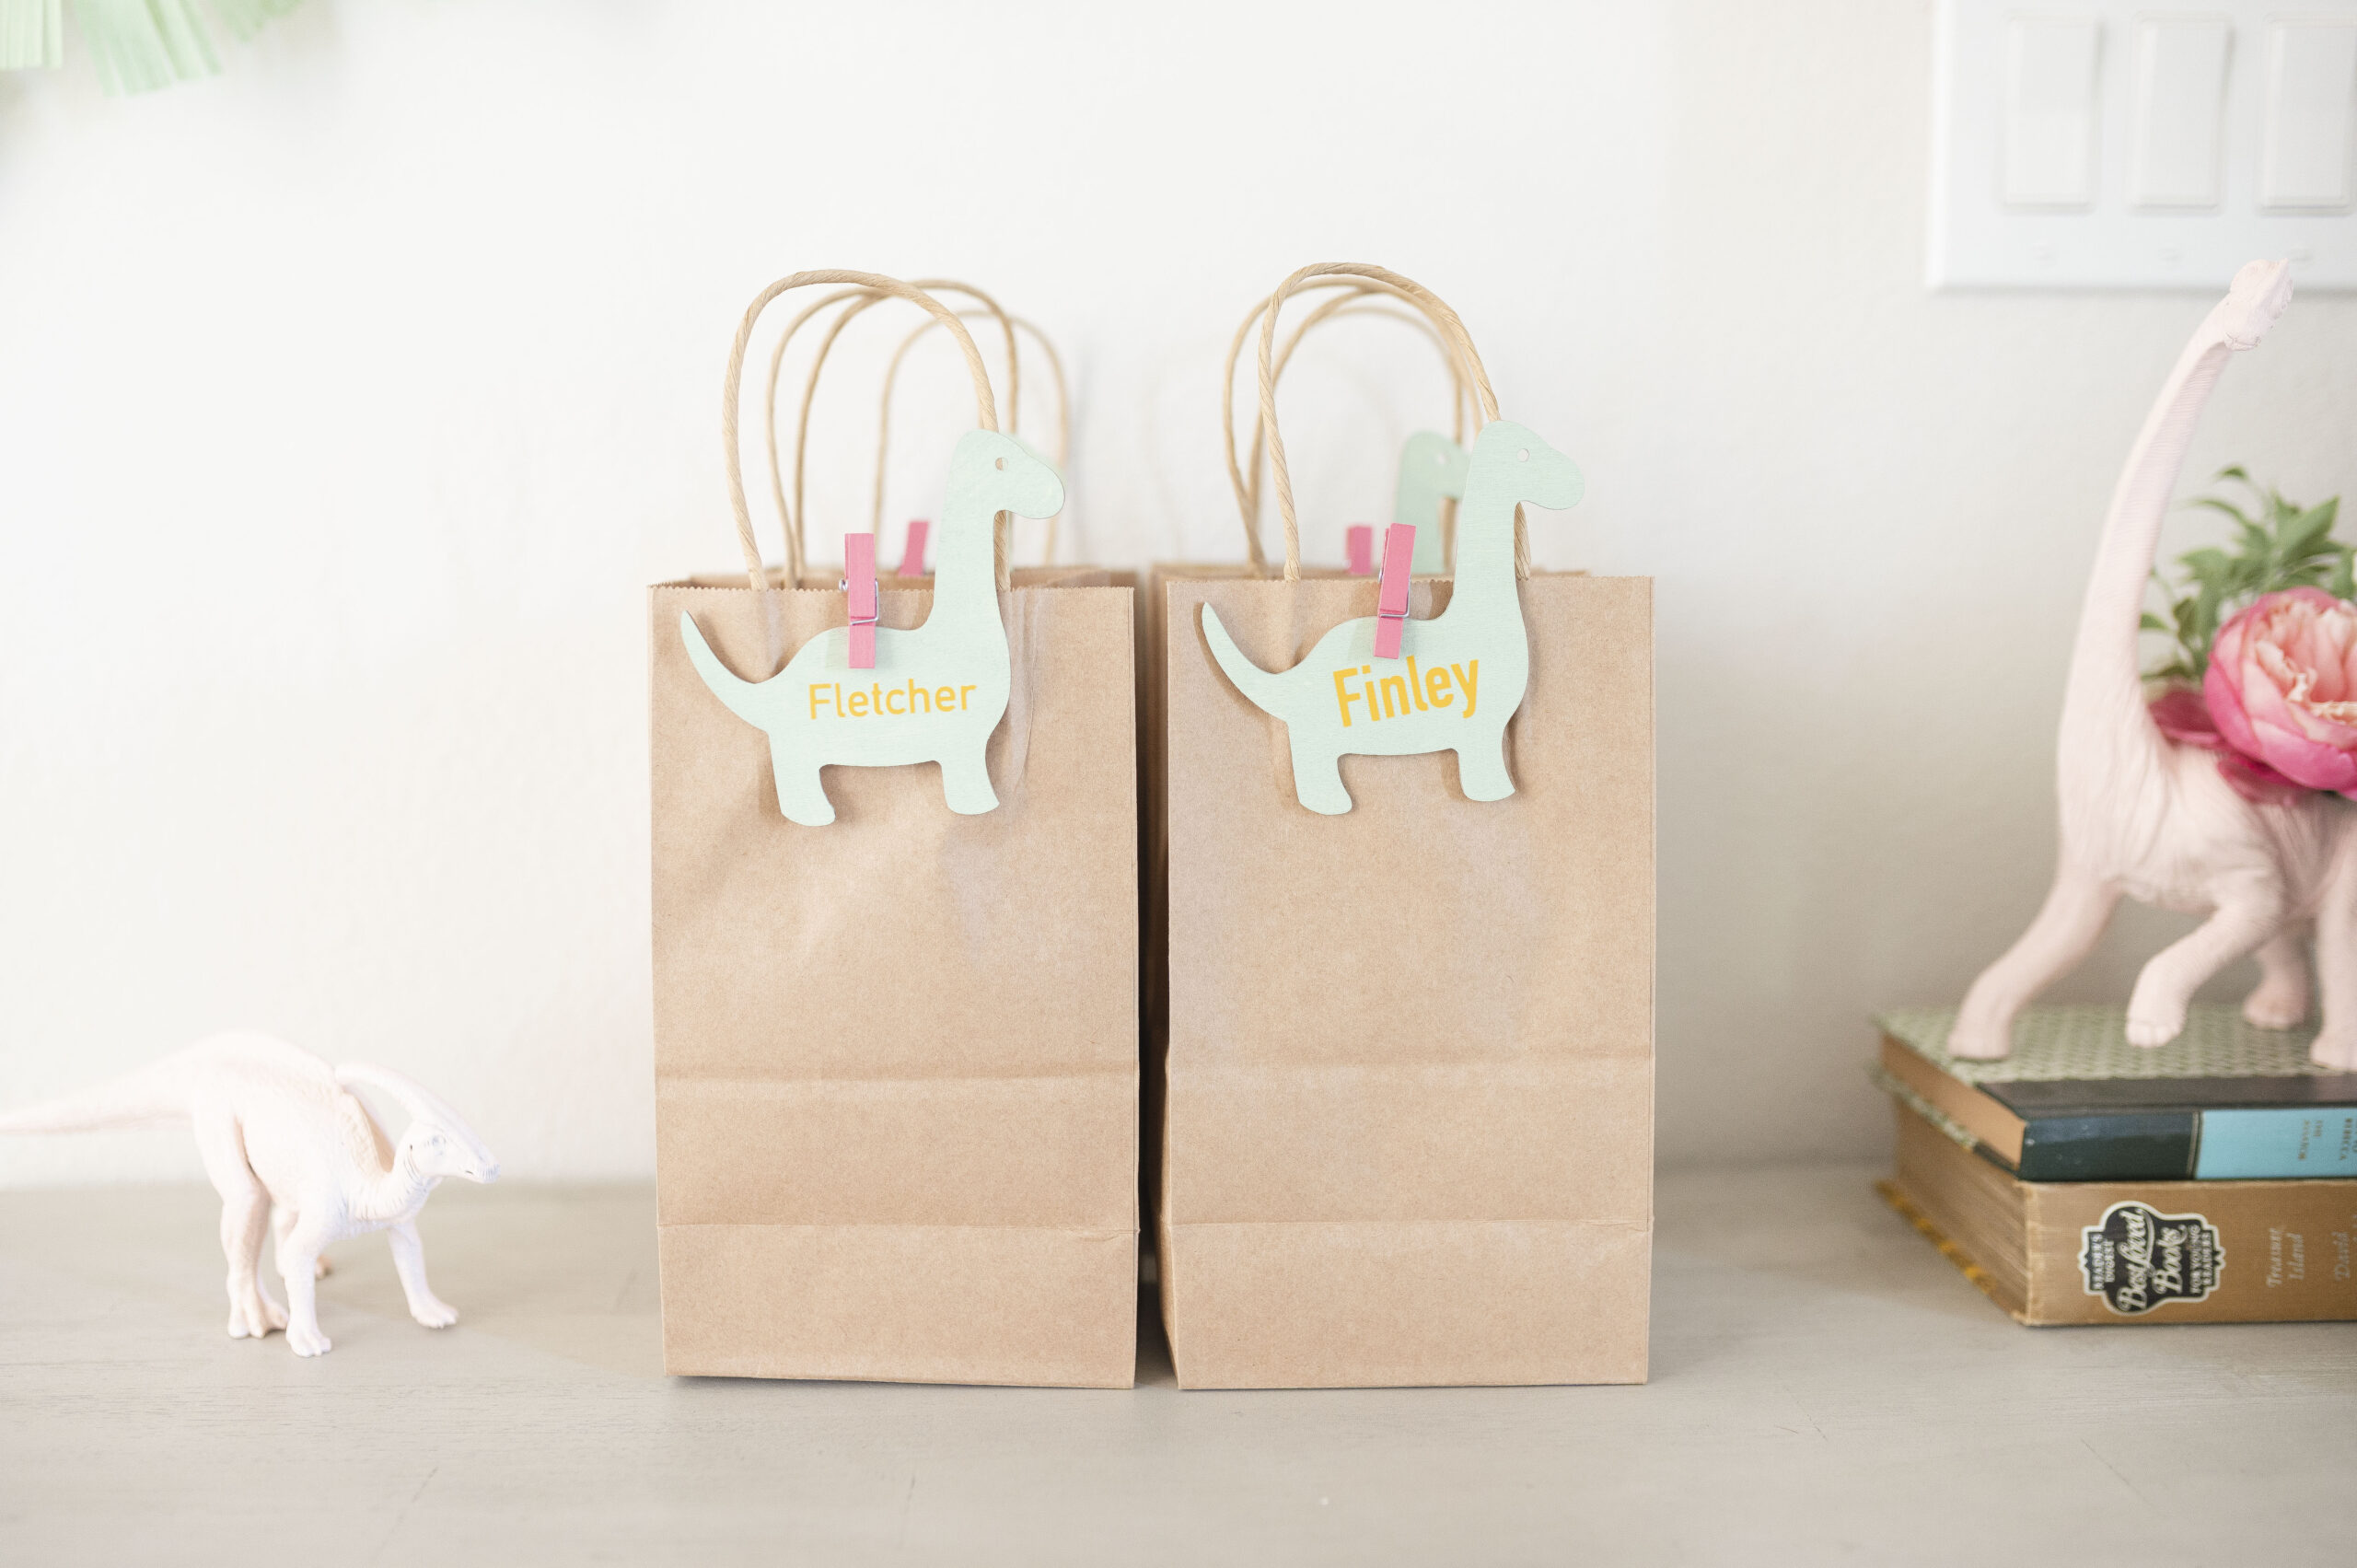 Goody bags for Three Rex birthday party featuring brown bags and green dinosaur